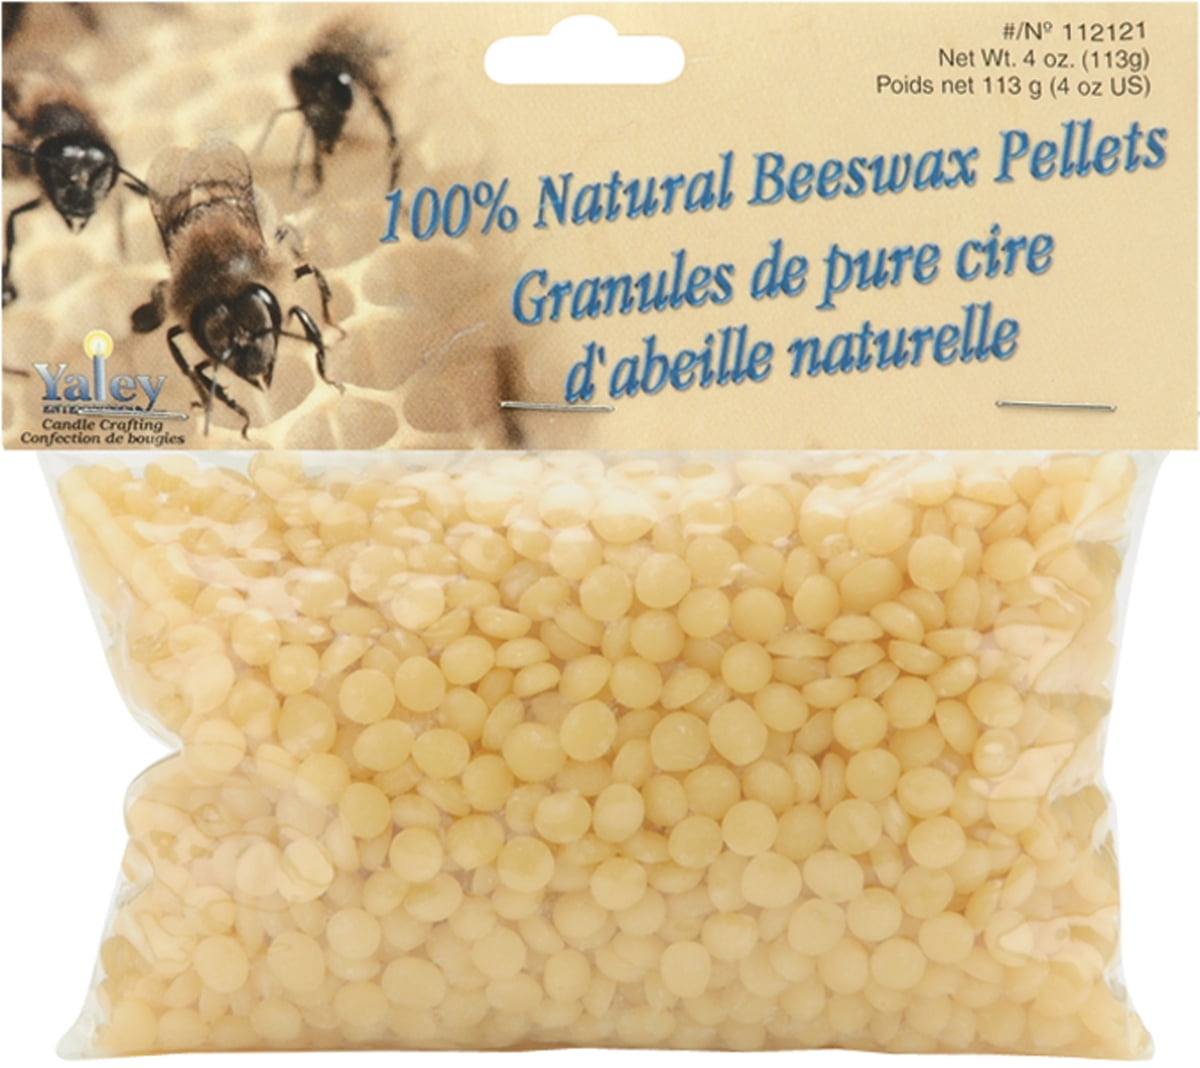  10LB Beeswax Pellets Beeswax for Candle Making Beeswax Pellets  for Skin Beeswax Beads Beeswax Bulk Beeswax for Lotion Making for DIY and  Craft Project